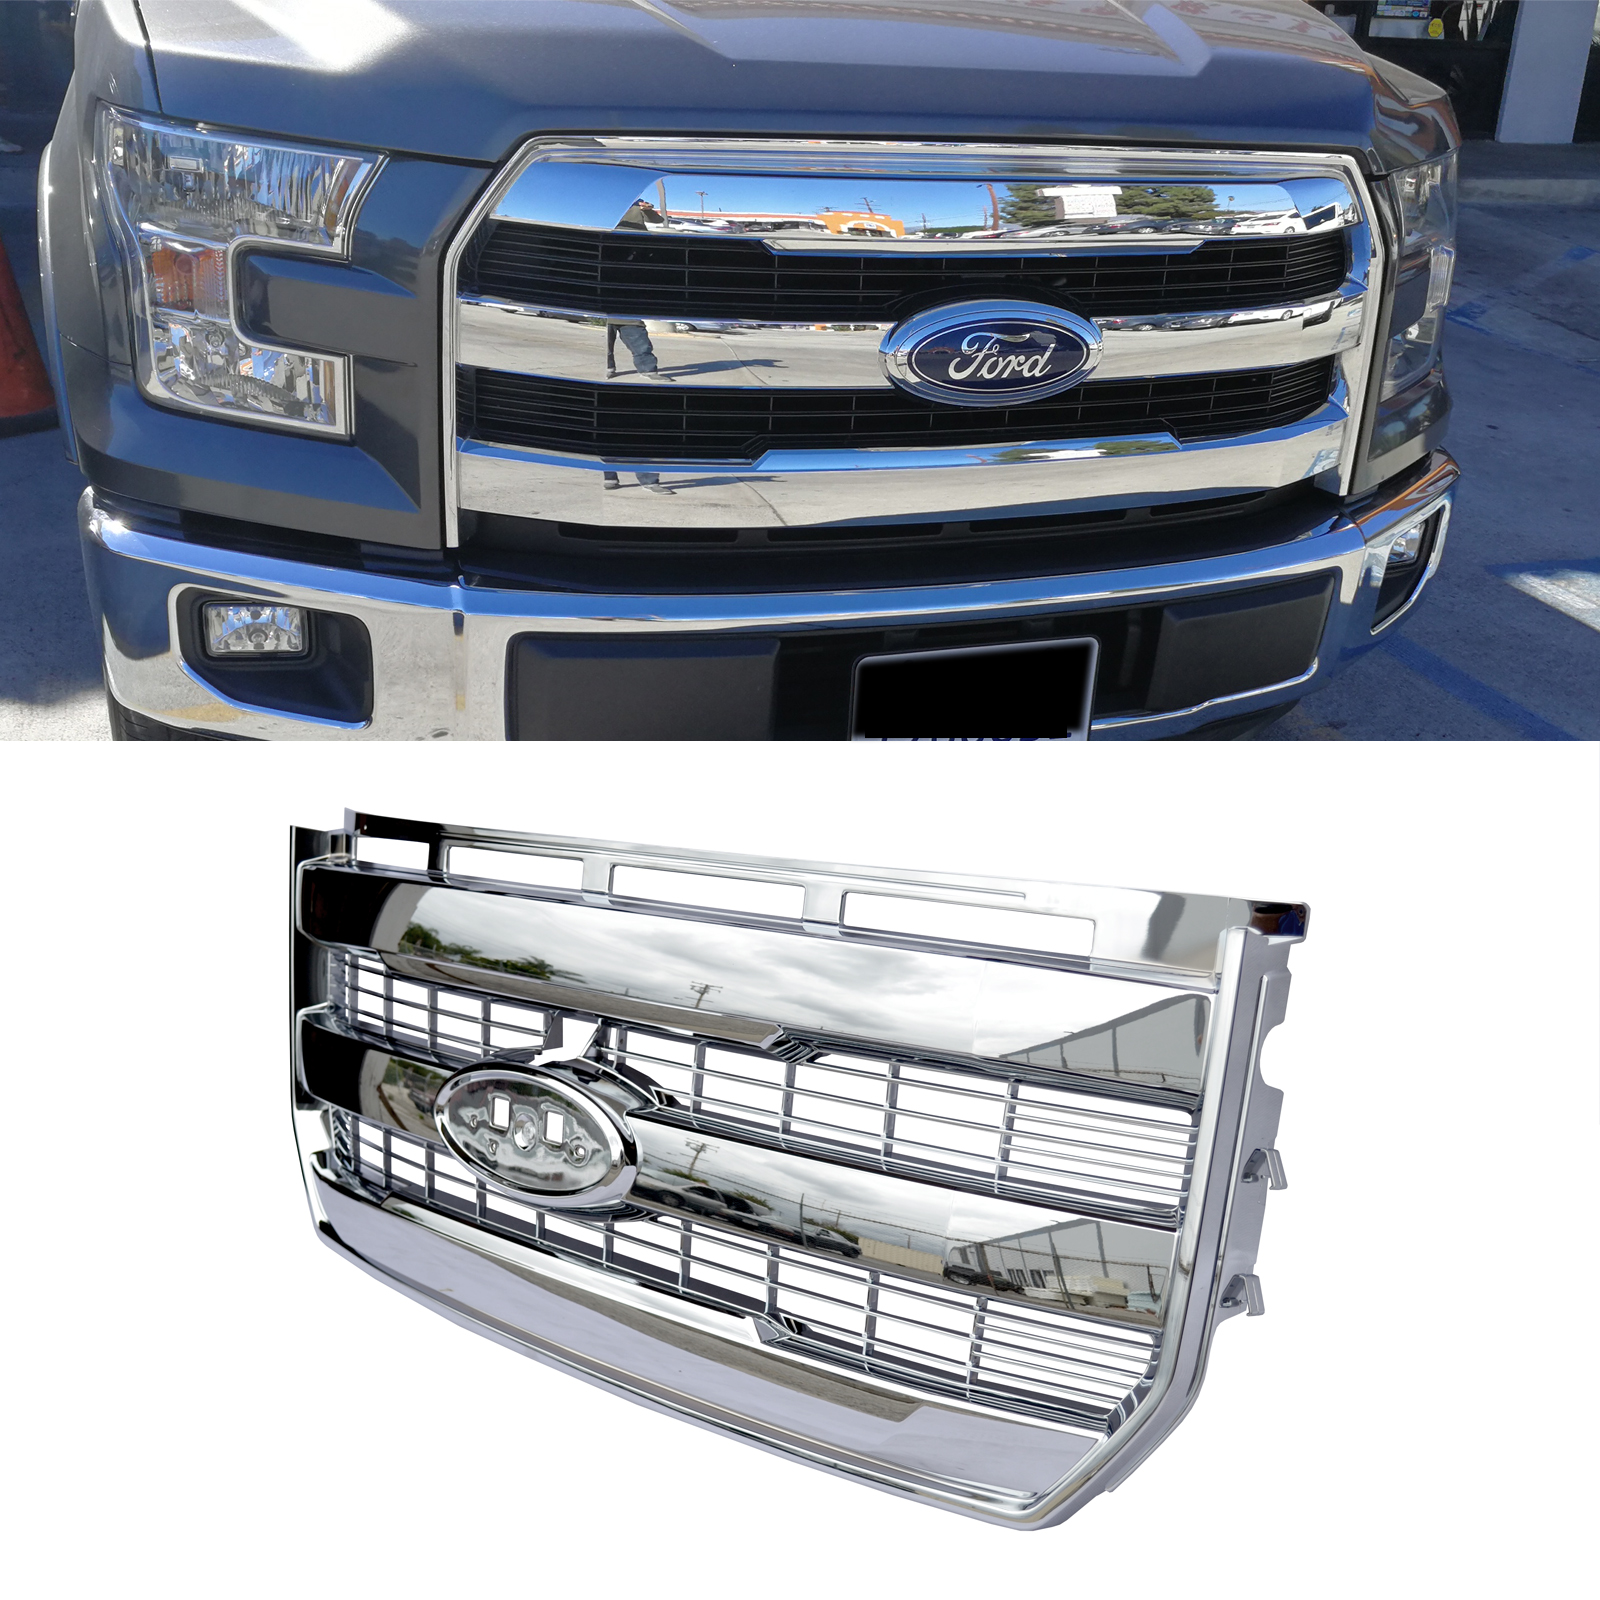 Front Bumper ABS Plastic Grille For Ford F150 2015-2017 Chrome King Ranch Style | eBay 2017 Ford F 150 Front Bumper Removal